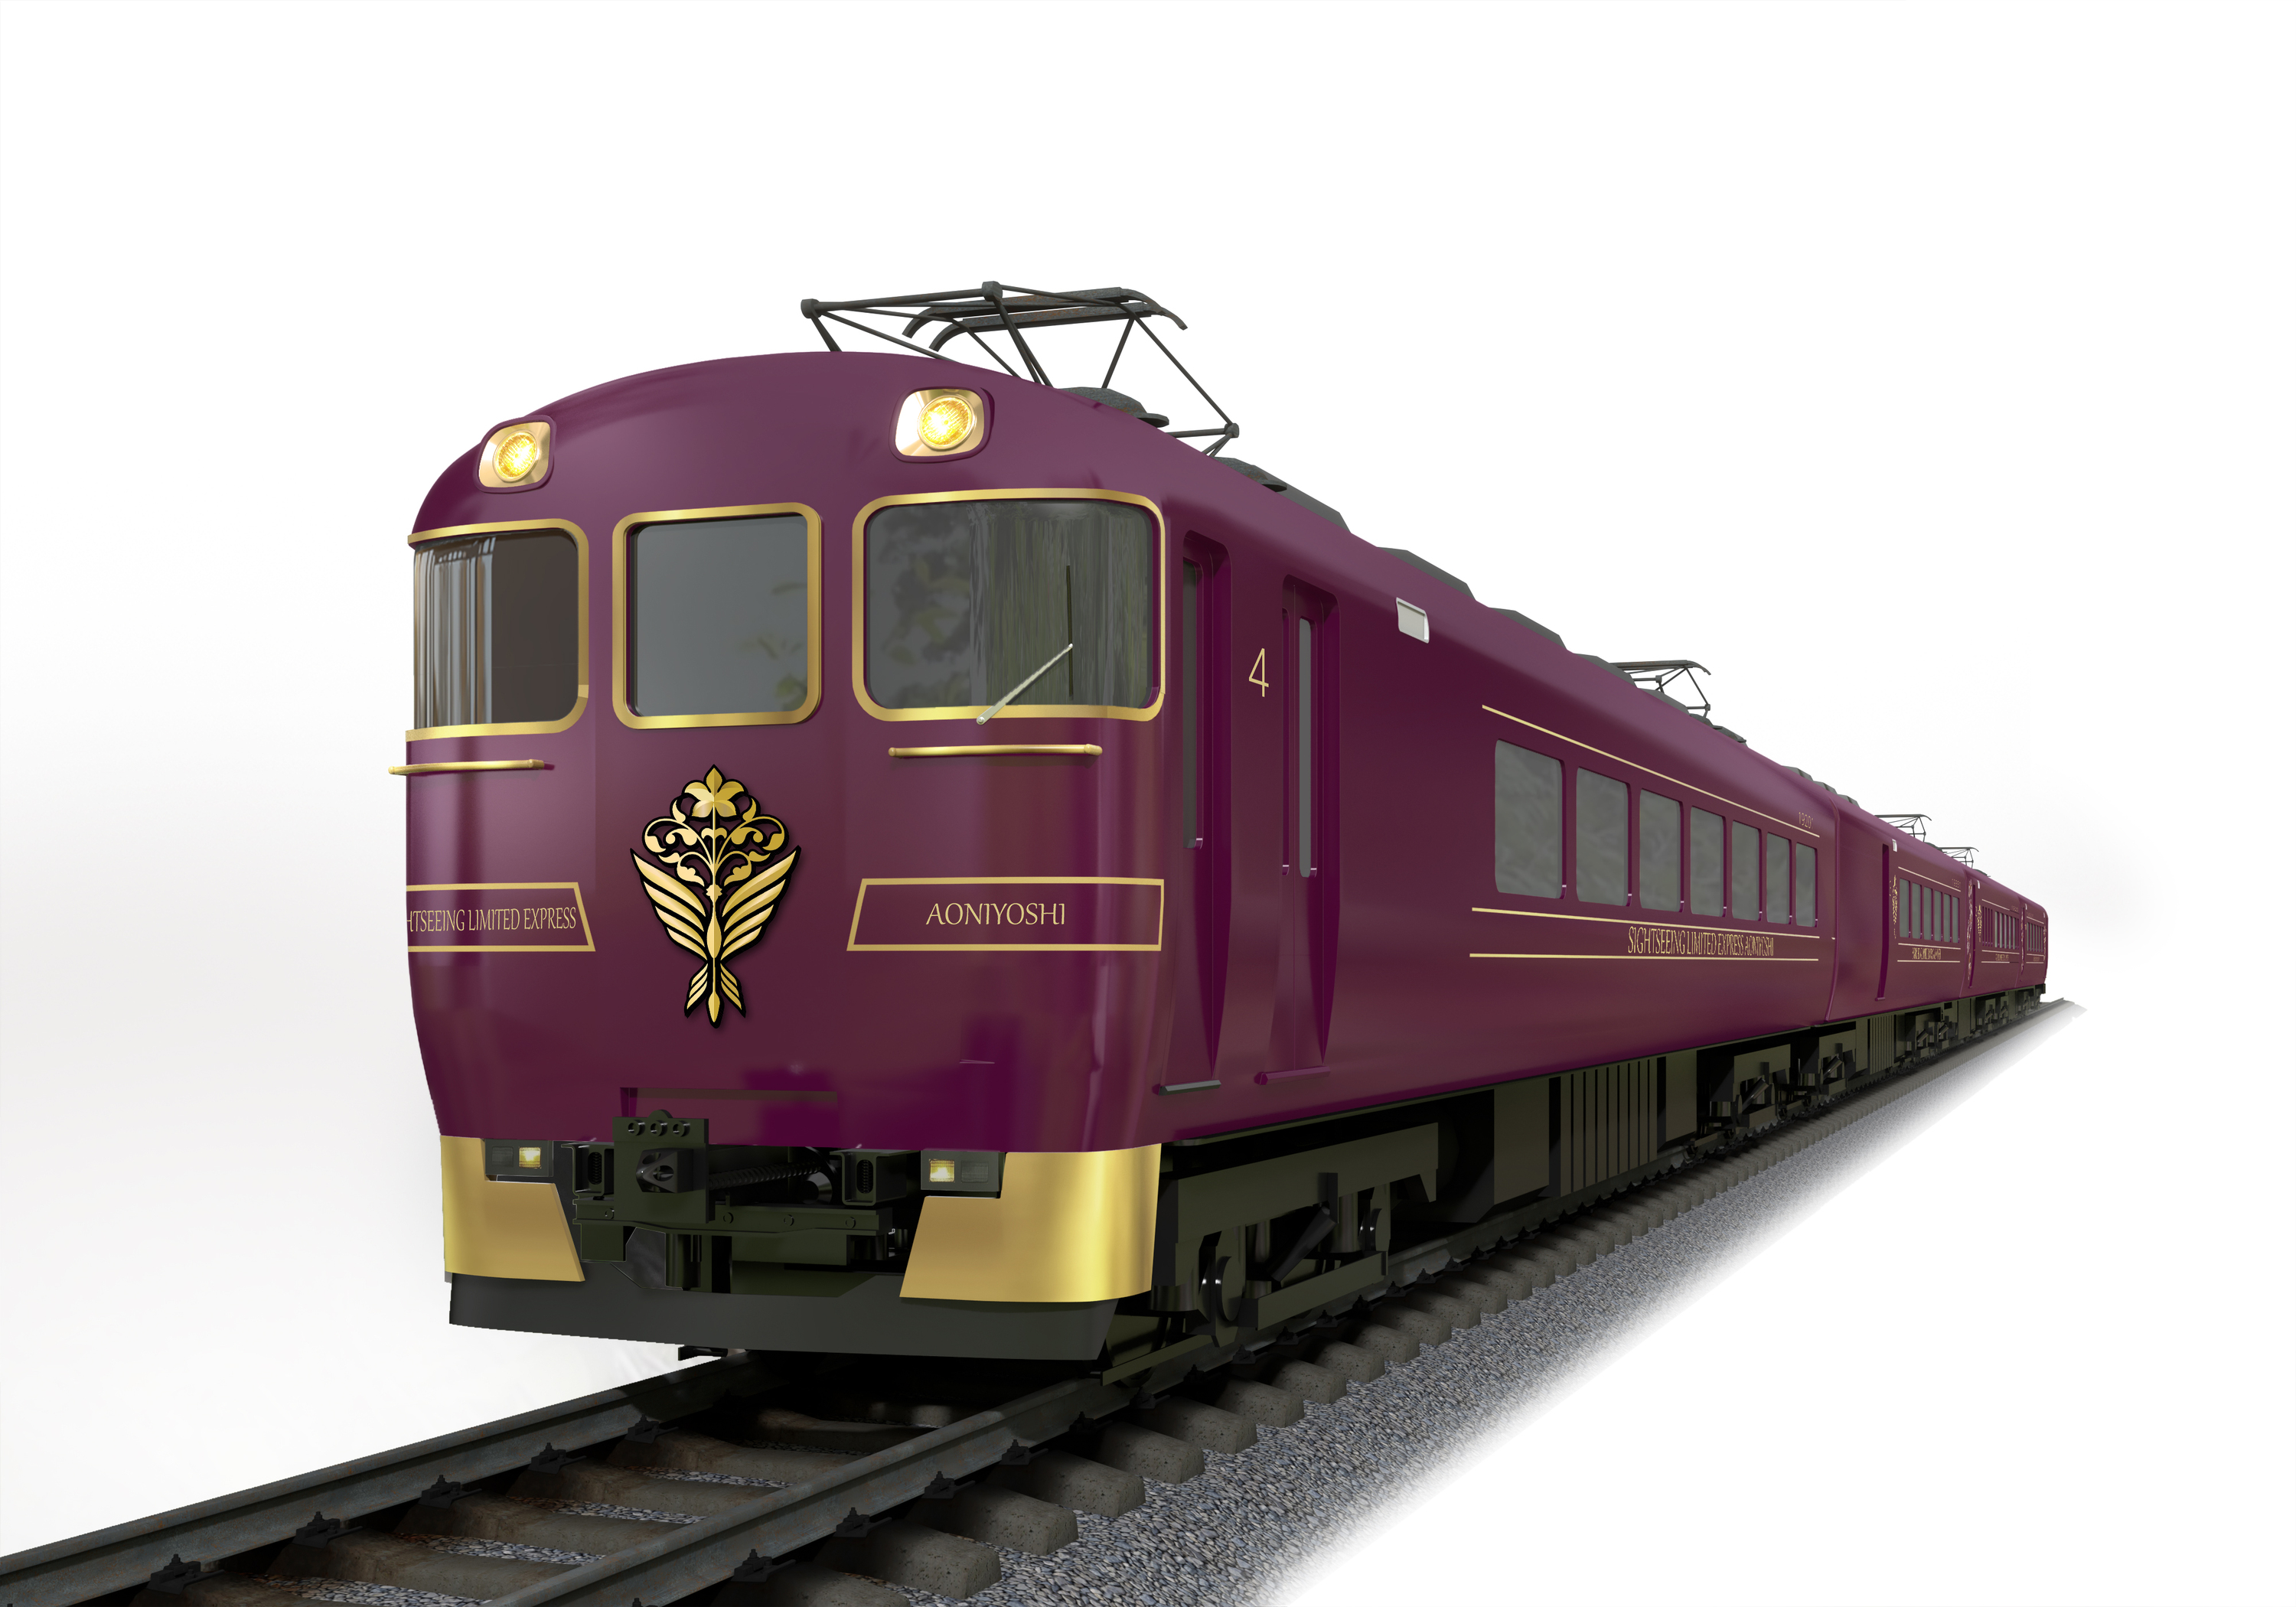 An artist's impression of a dark purple luxury train exterior on tracks, with a white background